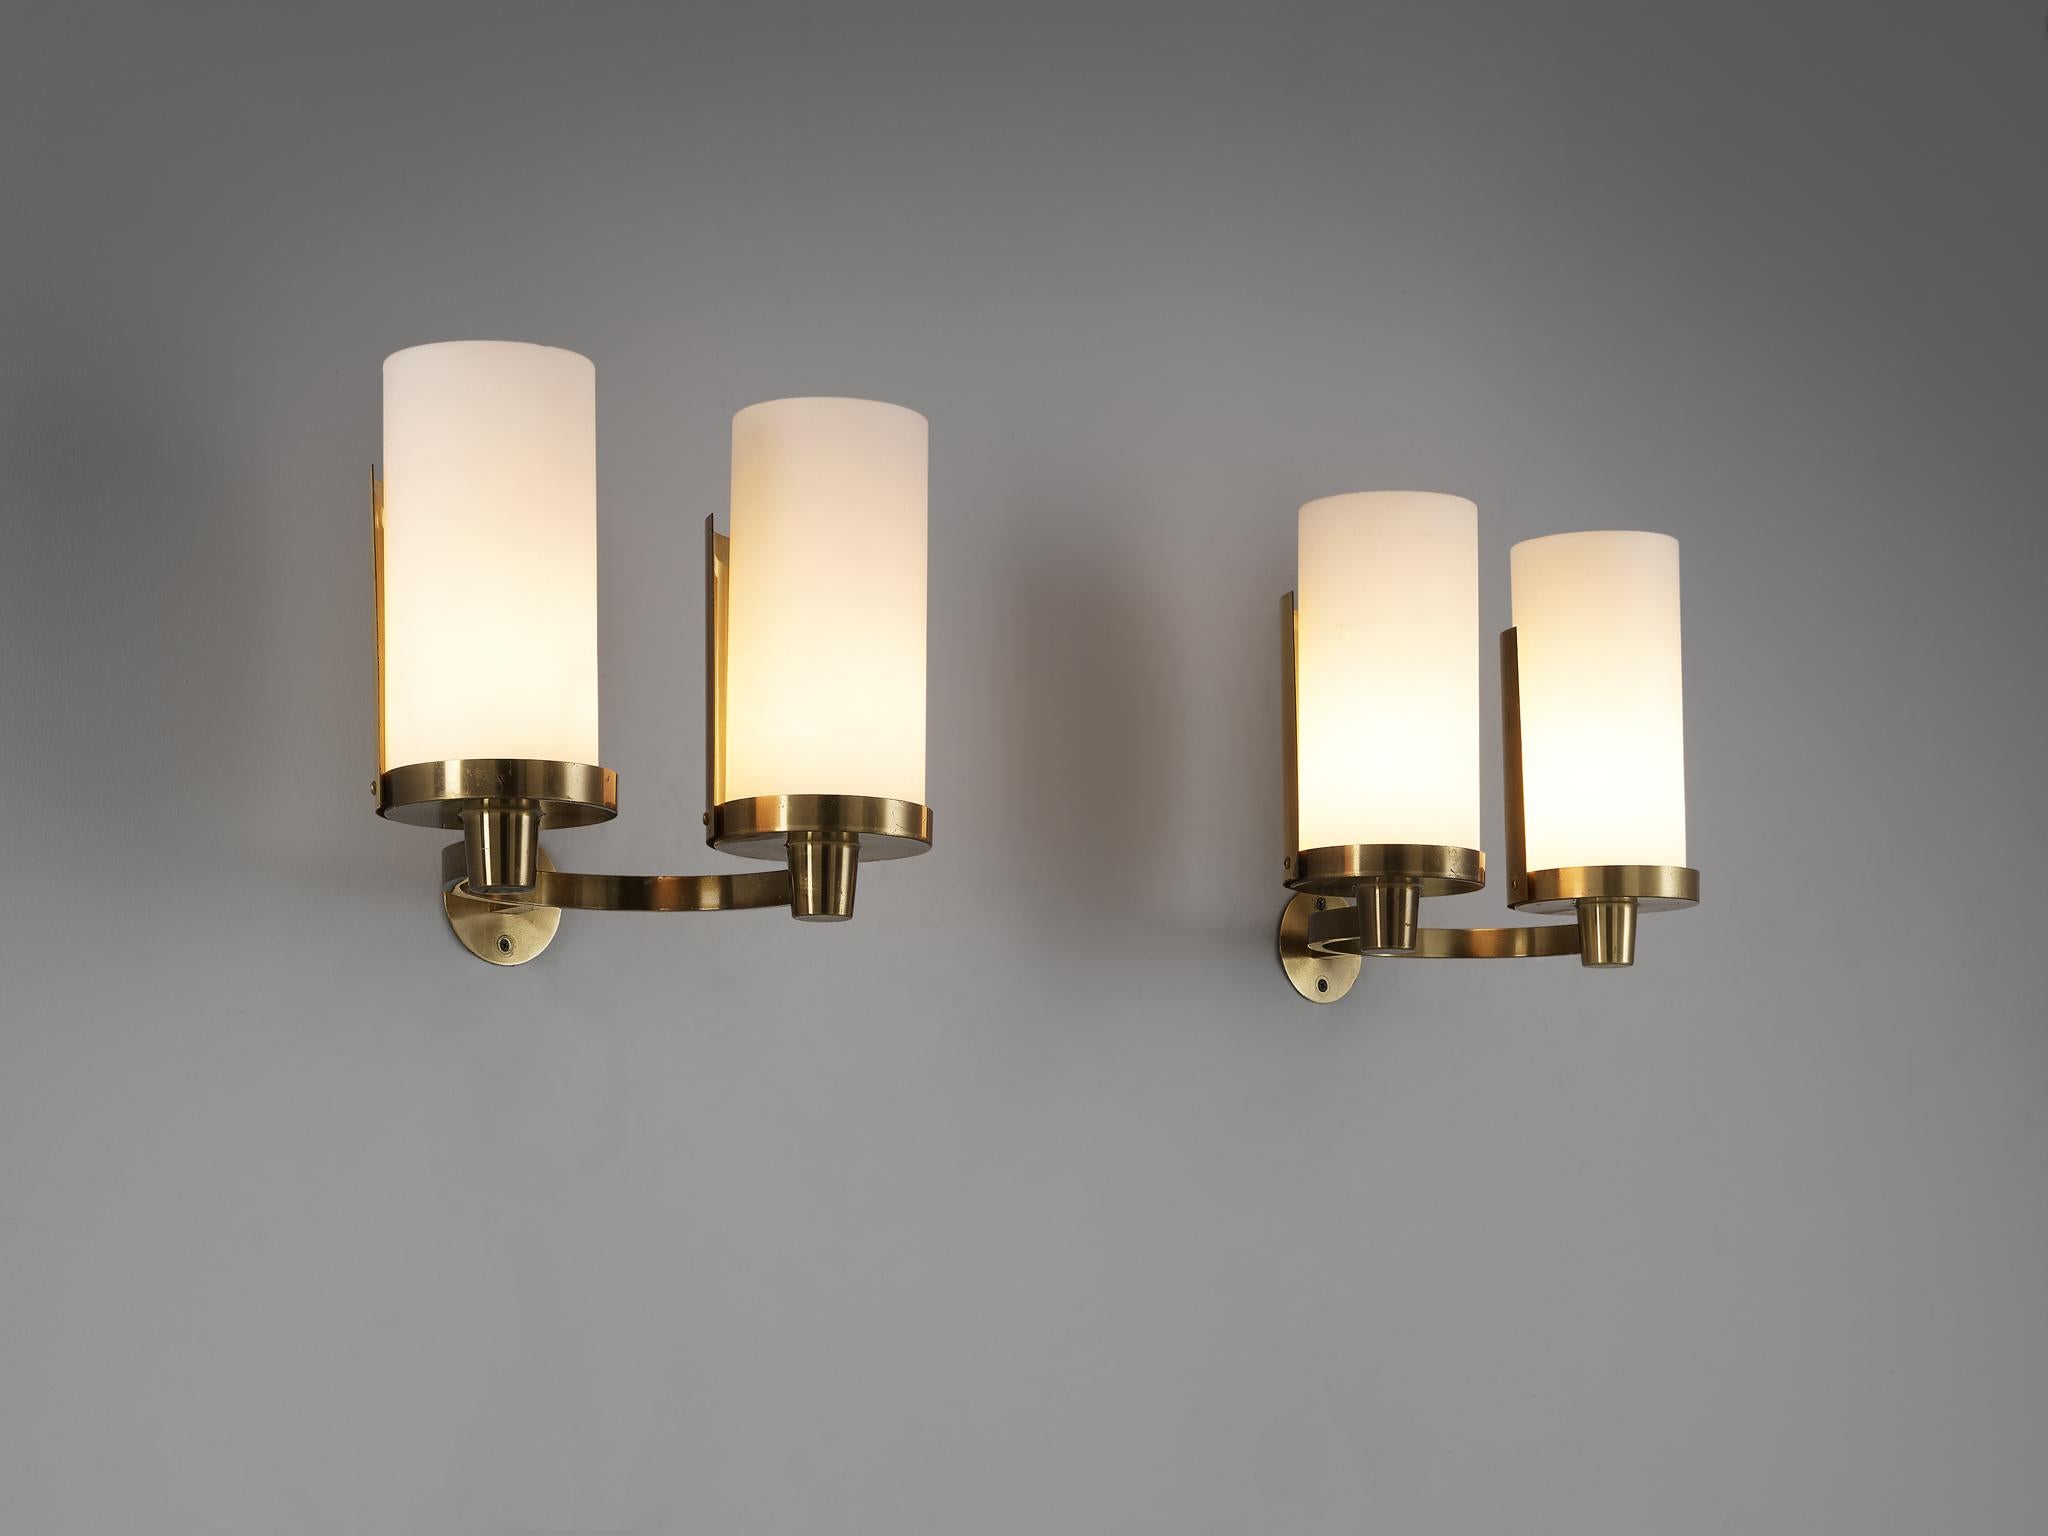 Rolf Saenger Graae, wall lights, brass, glass, Denmark, 1950s. 

Designed by the Danish architect Rolf Saenger Graae (1916-1996) who gained renown for his contributions to ecclesiastical architecture, which primarily involved the creation and